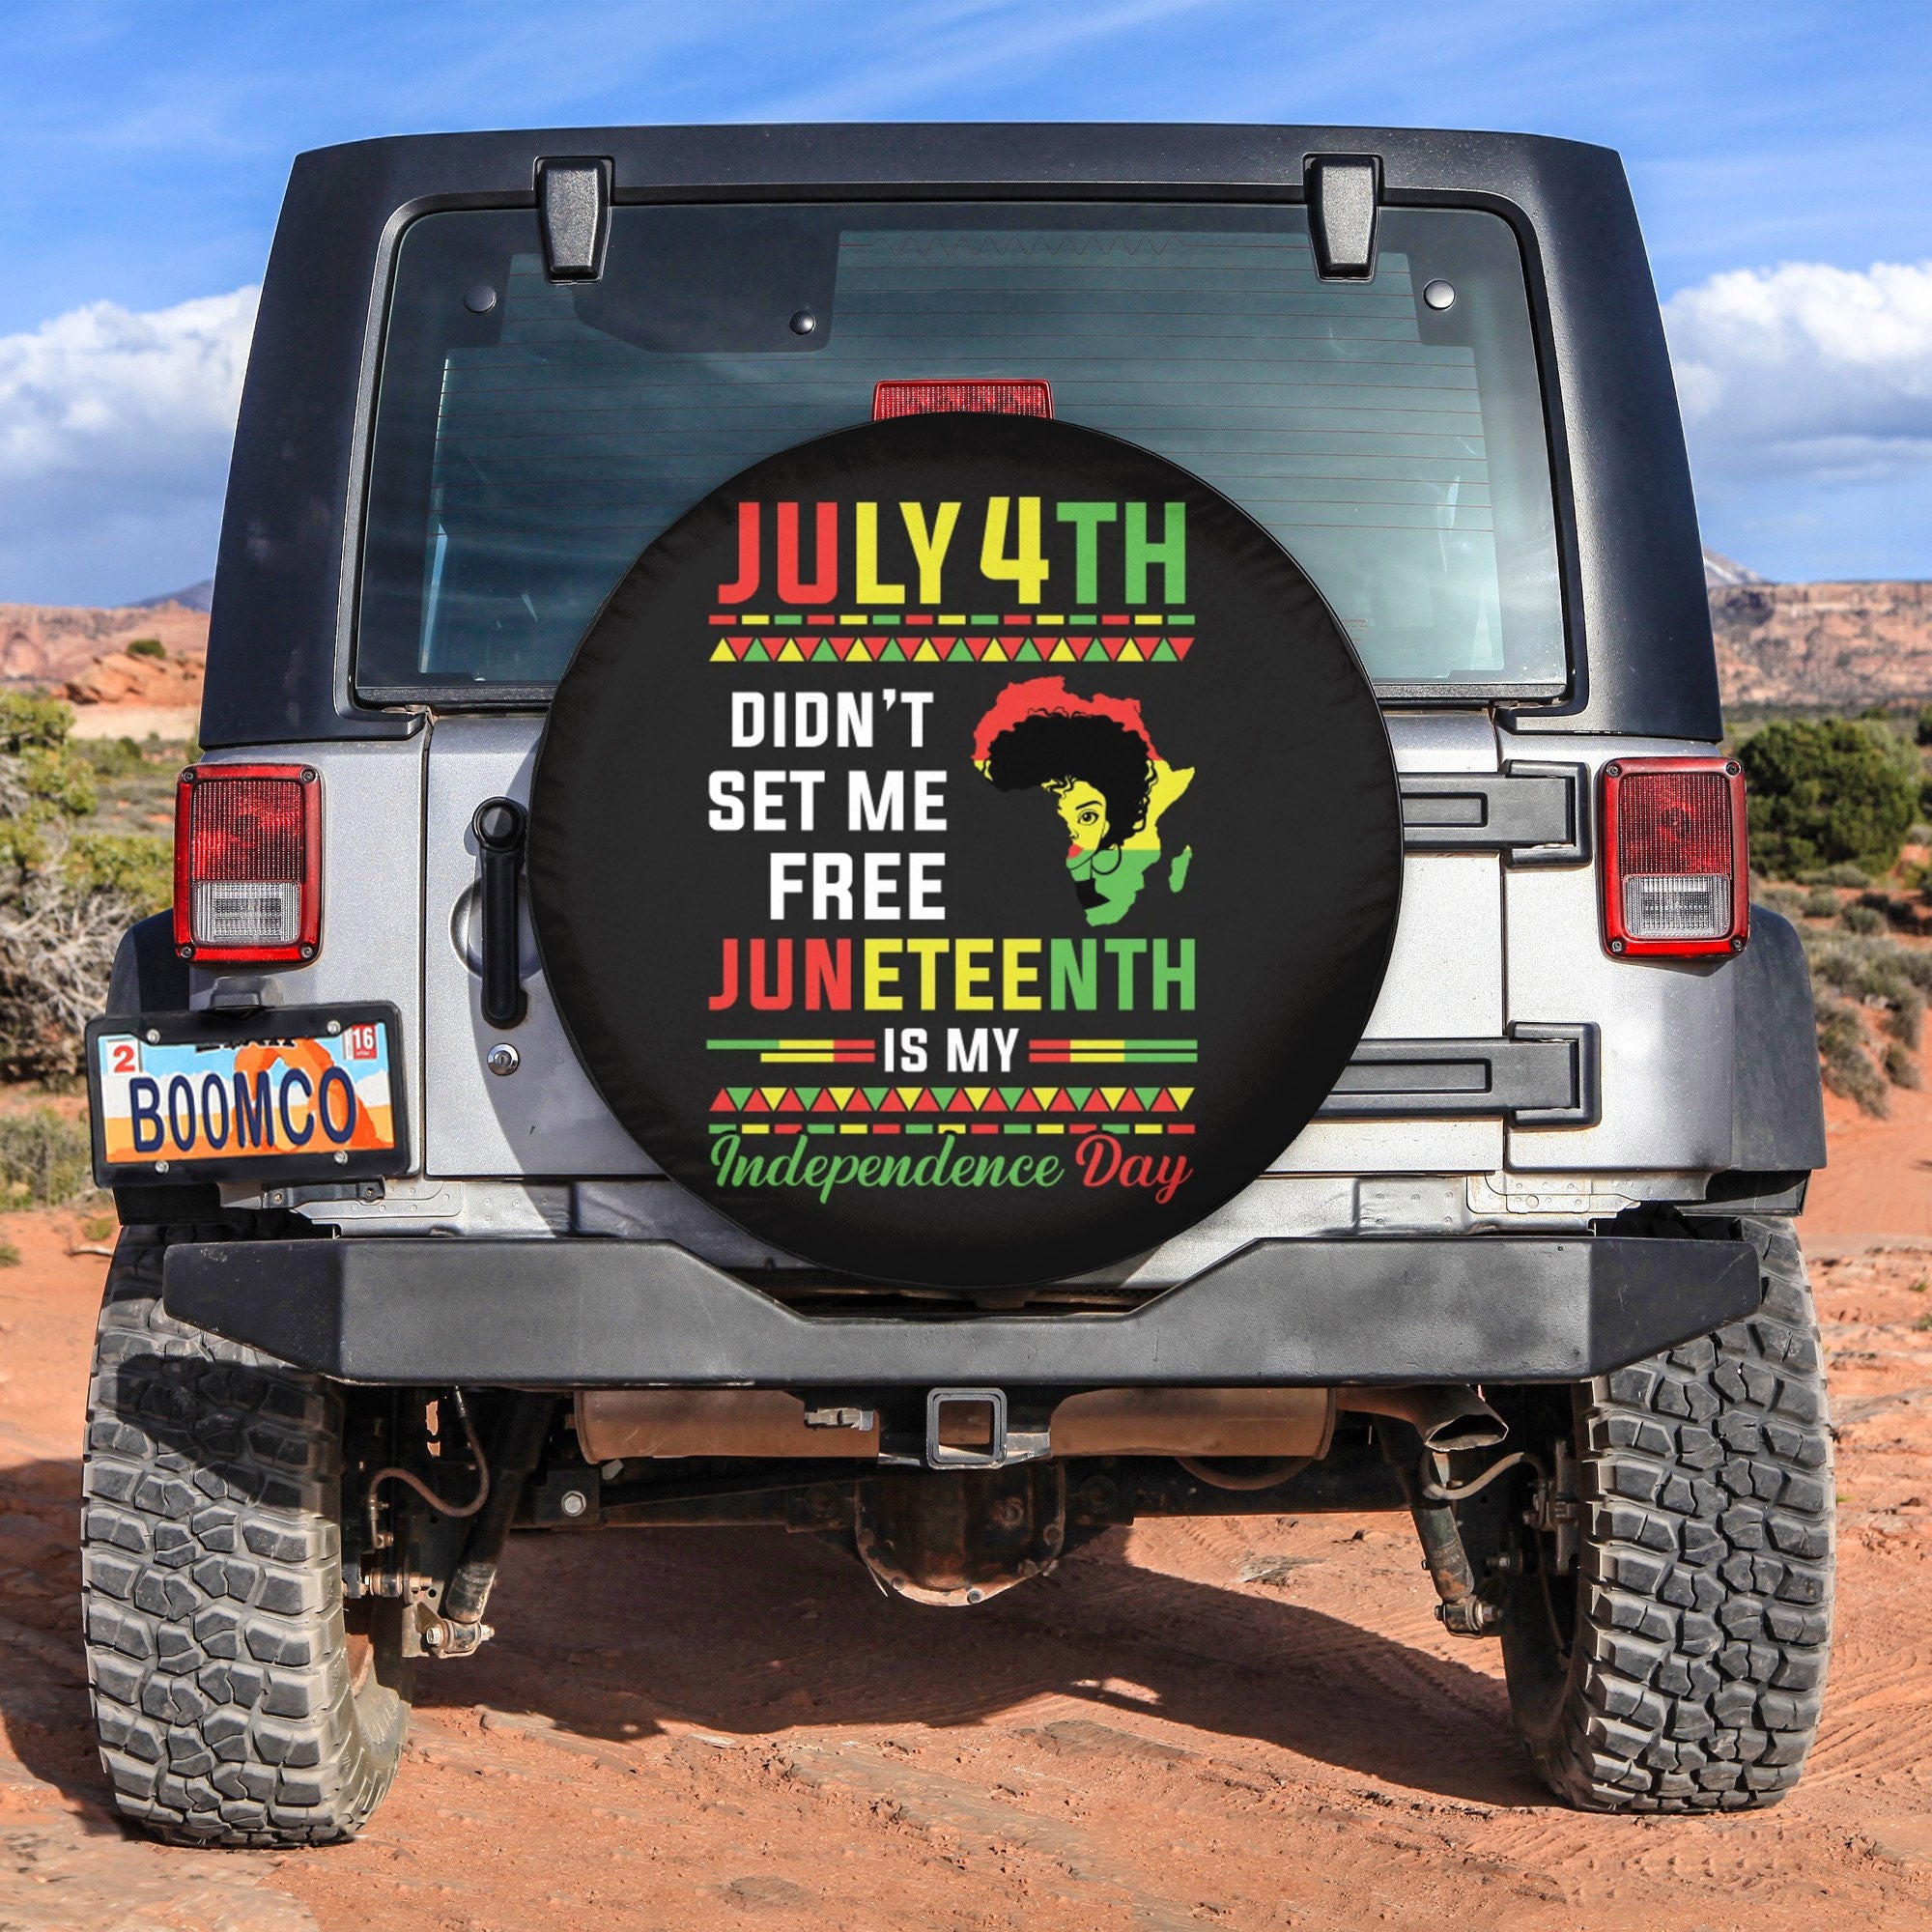 African Tire Covers - Juneteenth Spare Tire Cover Didn't Set Me Free Juneteenth Is My Independence Day NO.184 LT8